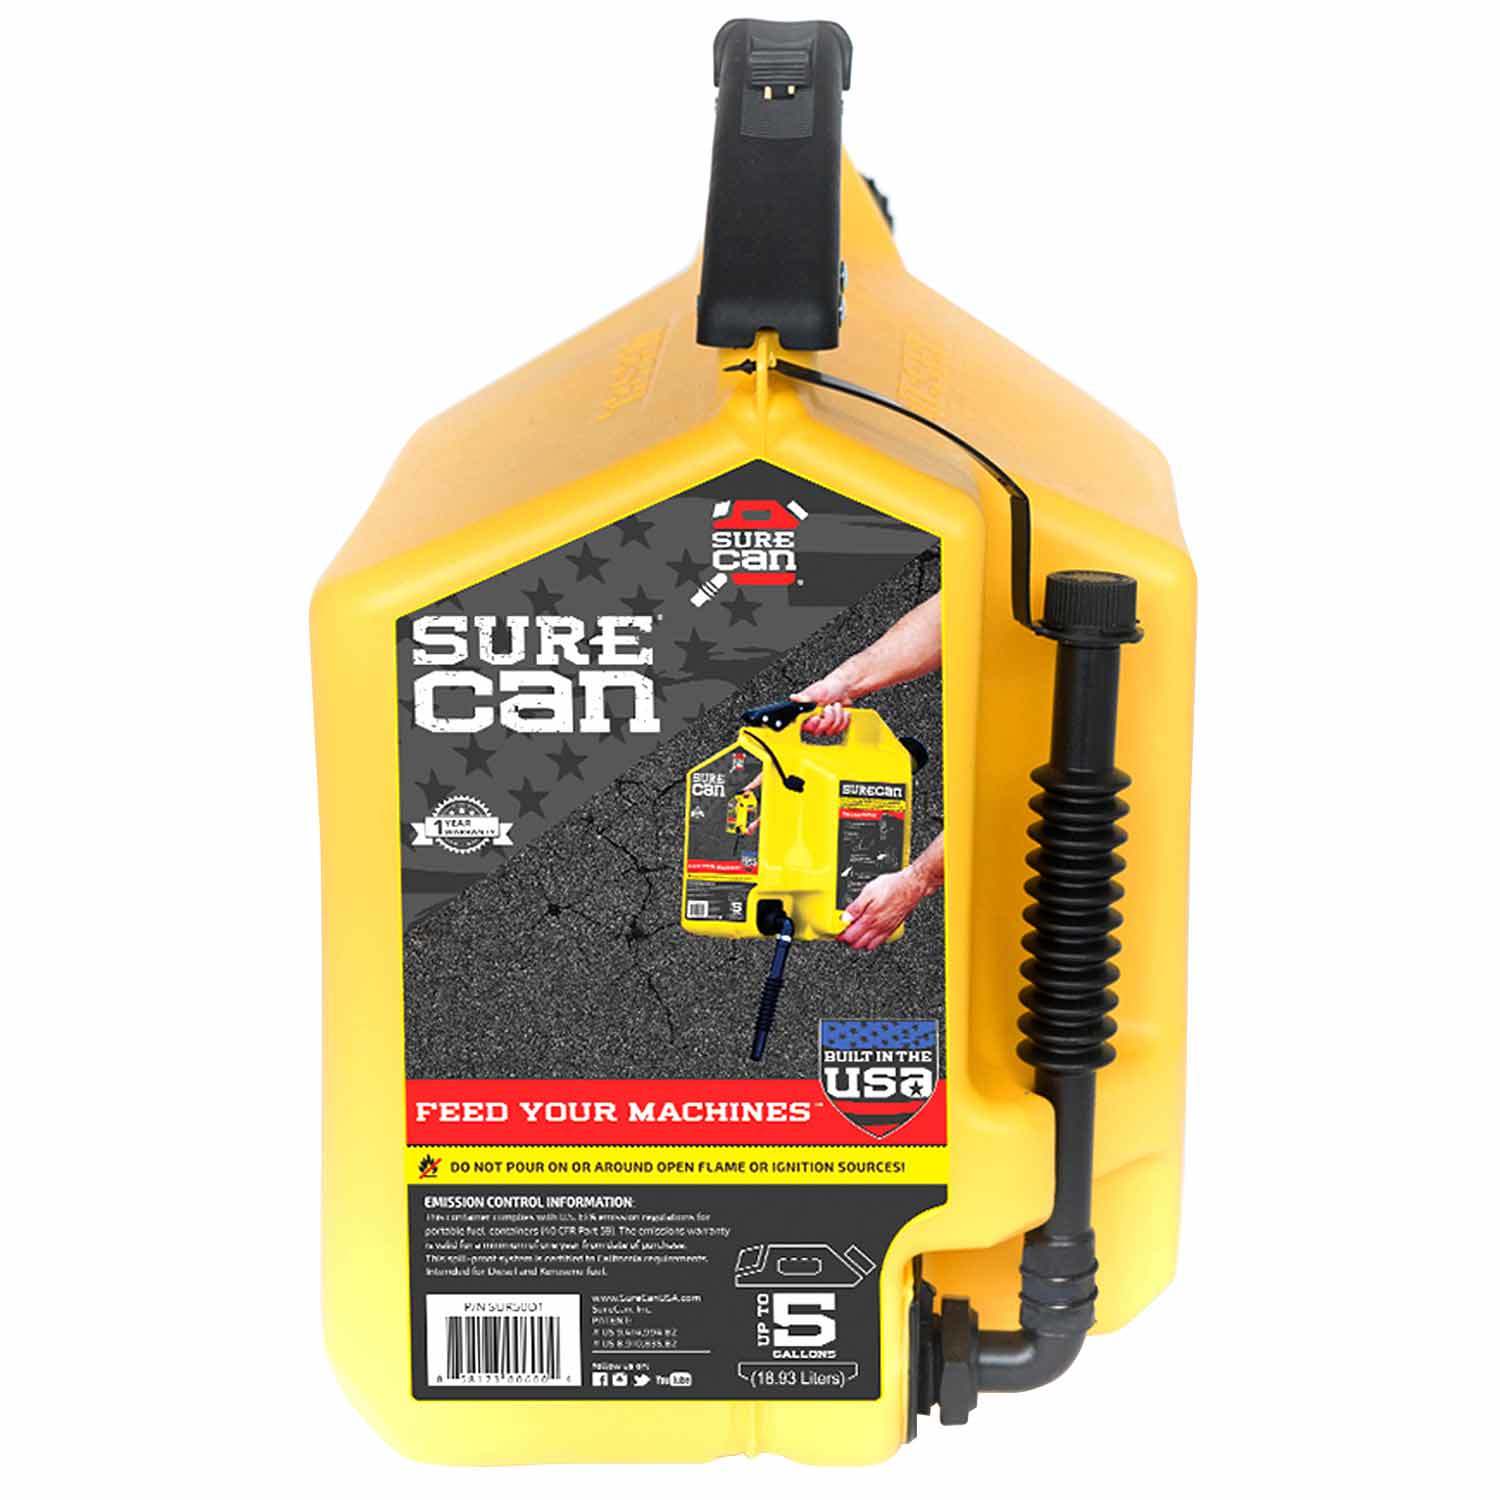 SureCan Gas Can Review  Is This the Best Gas Can on the Market? 